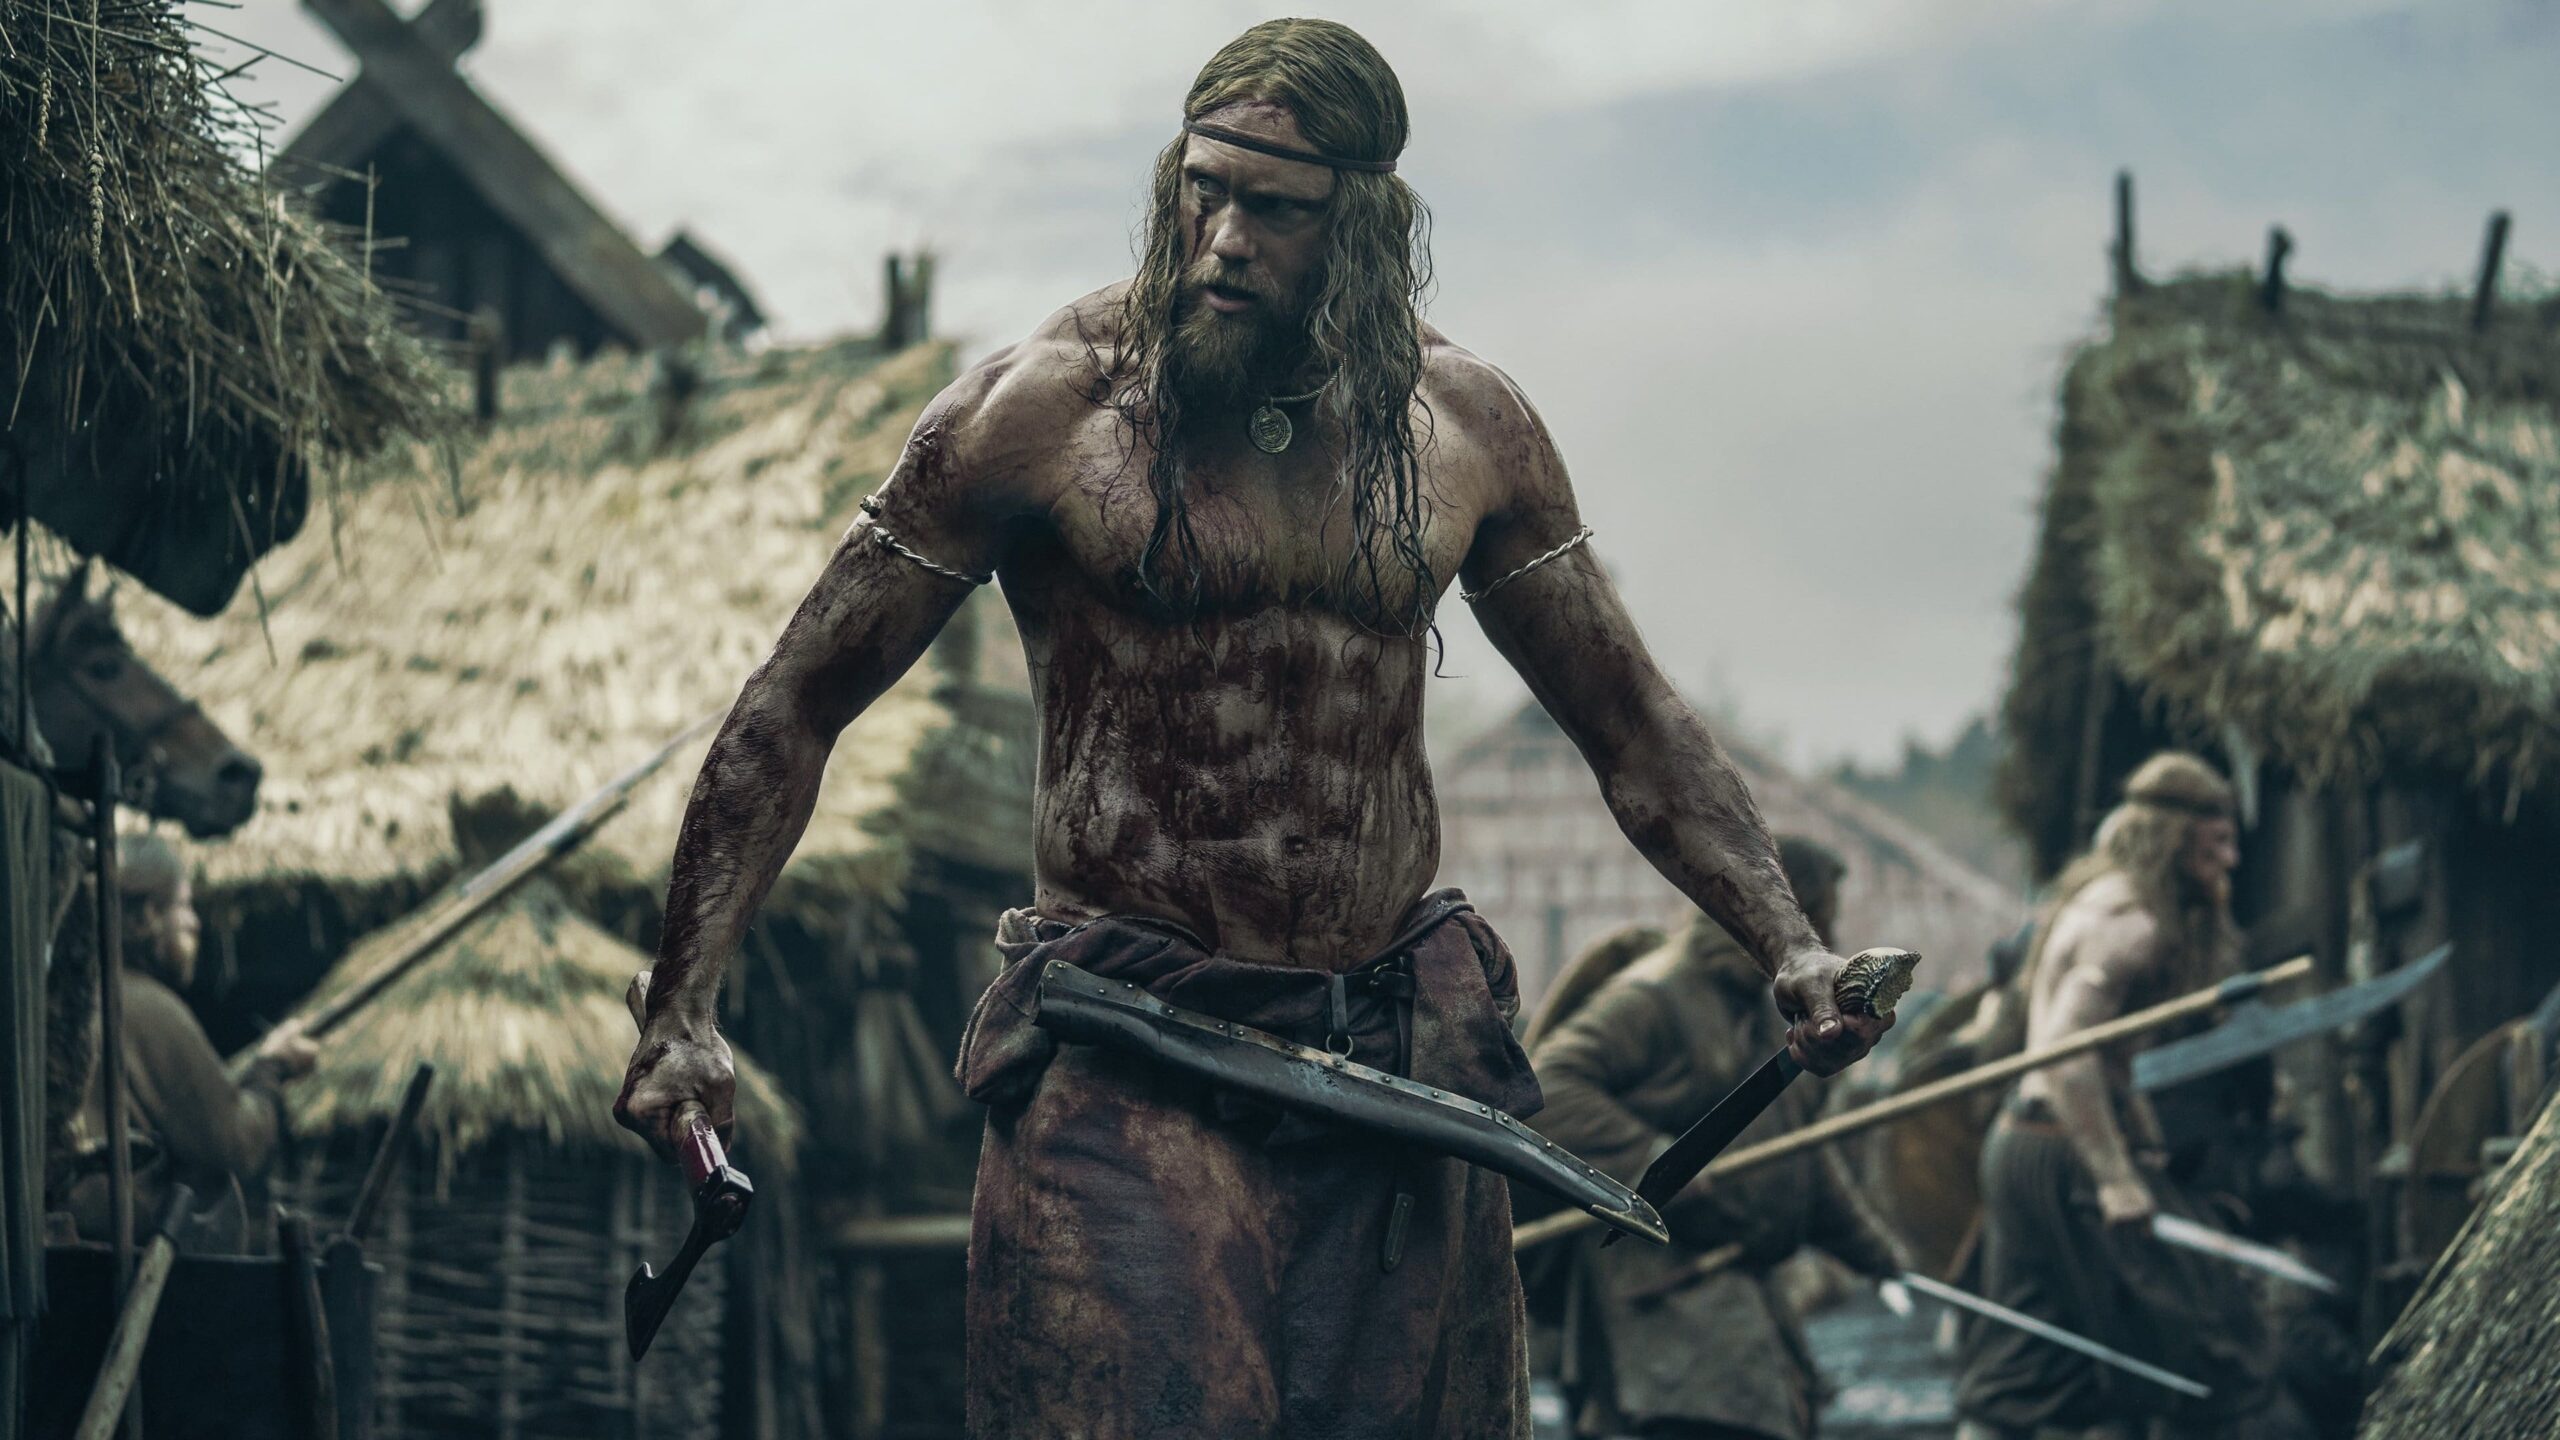 Alexander Skarsgård looks almost inhumanly muscular in this role